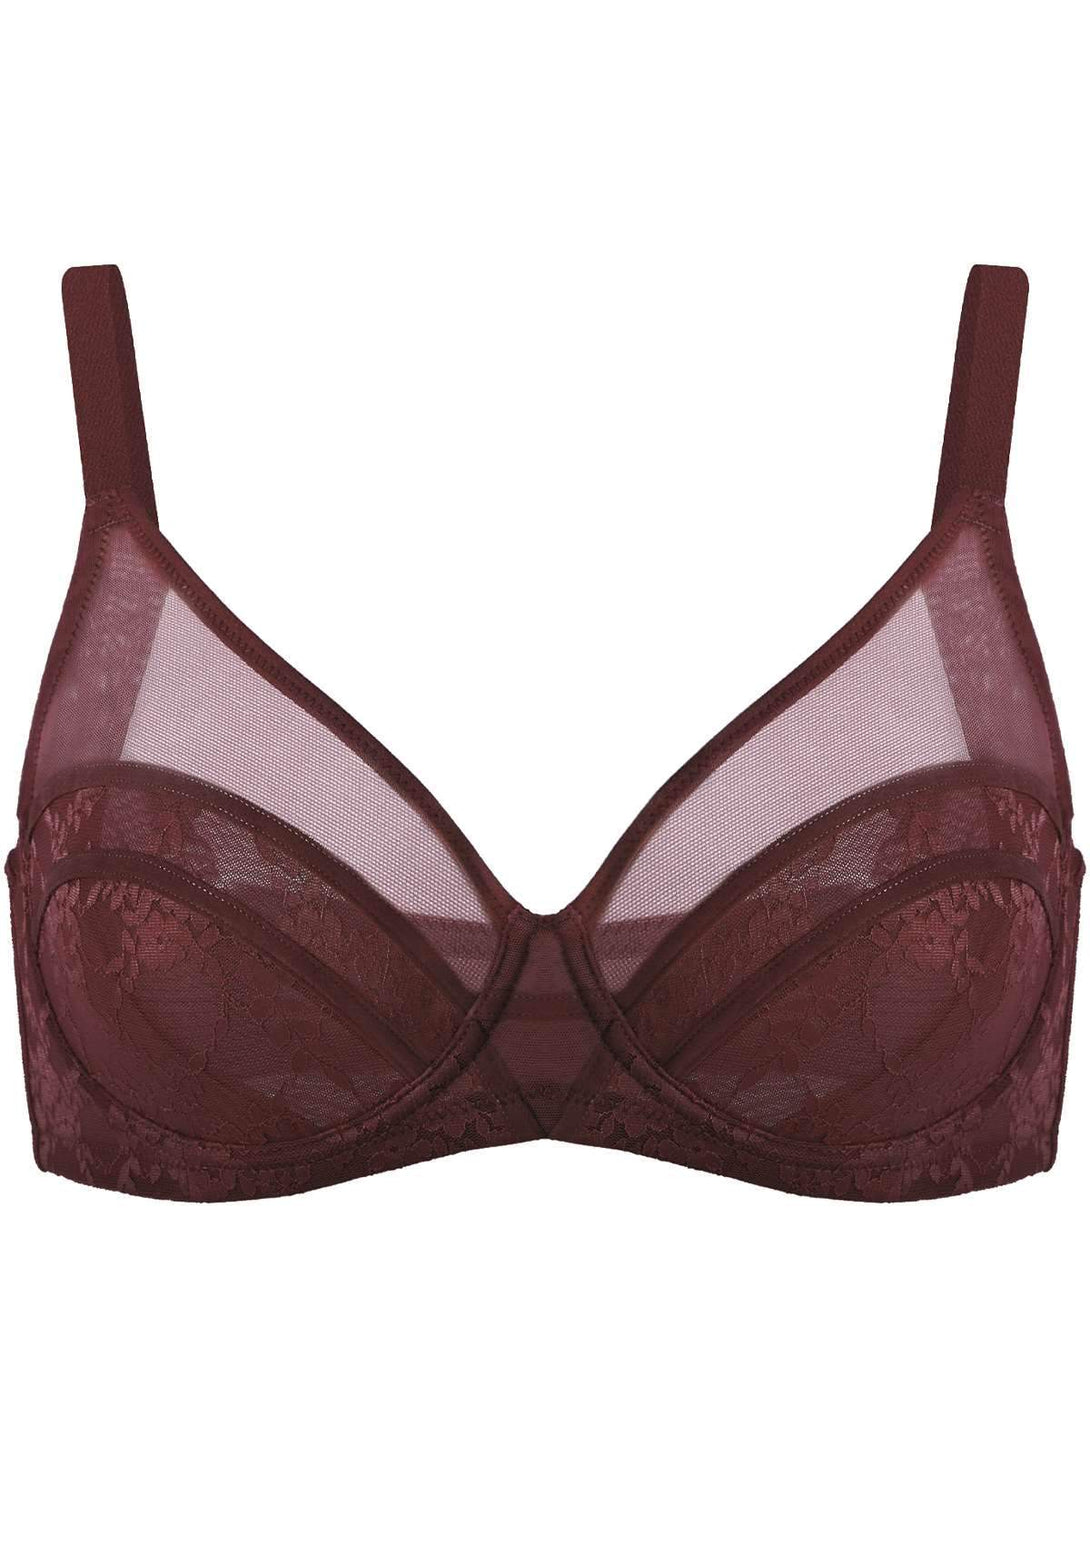 HSIA-EASTERBOGO Amour Sheer Lace Unlined Bra